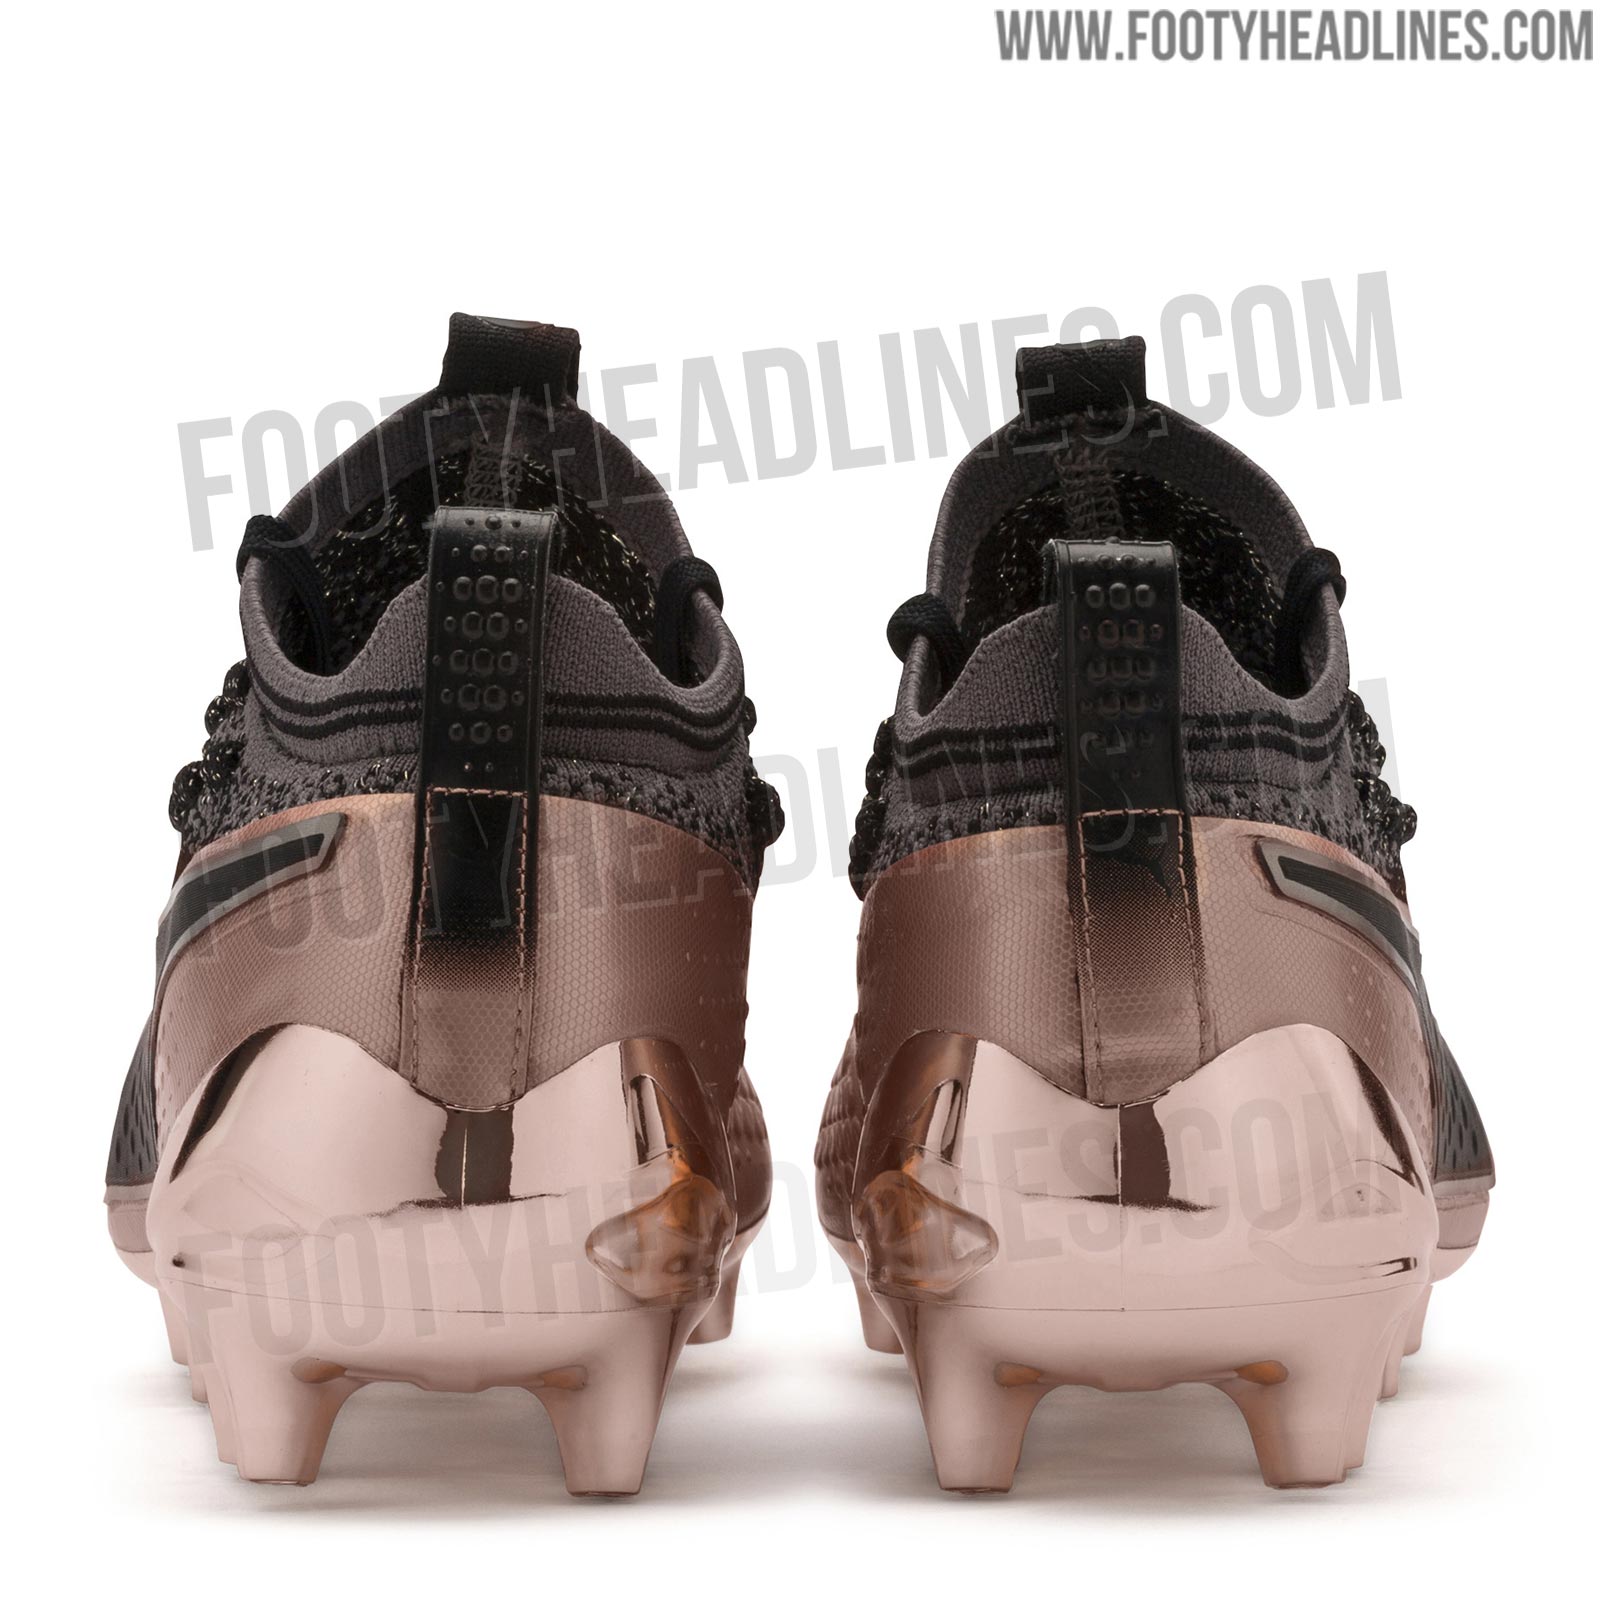 preview Kilometers Fellow Rose Gold Puma One 'Road to Glory Pack' Boots Revealed - Footy Headlines